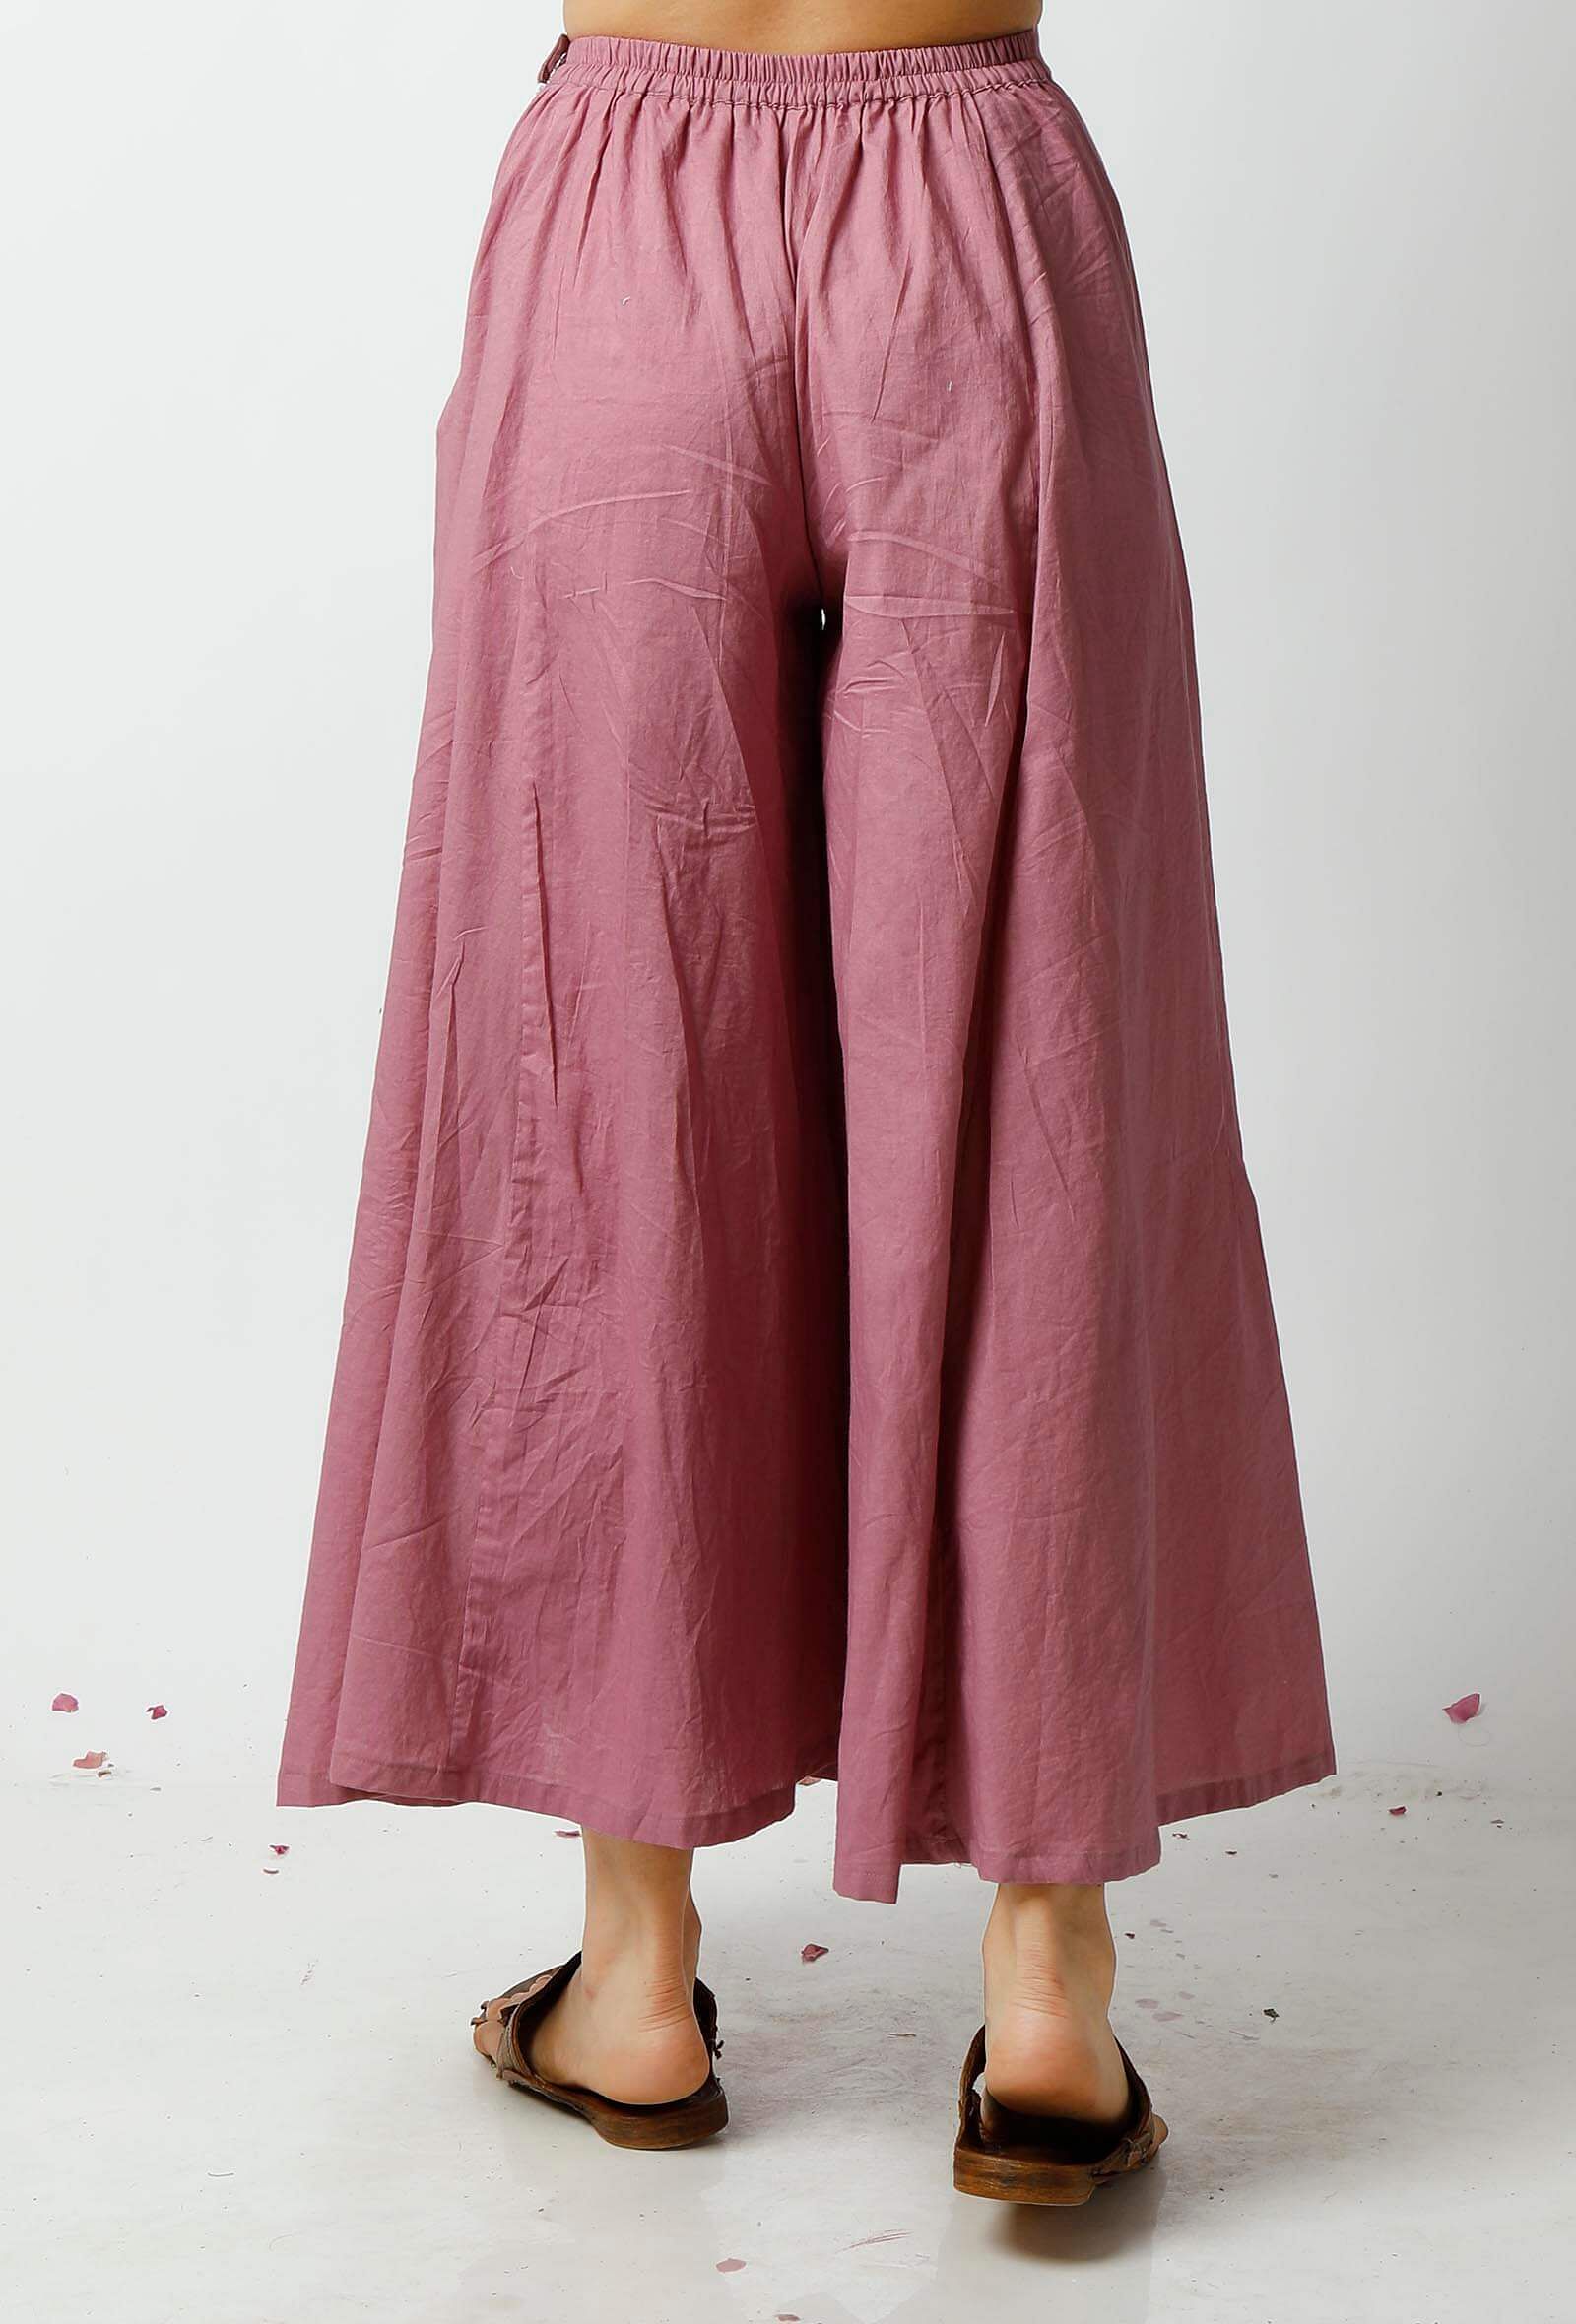 The Chaste Violet Cotton Palazzo